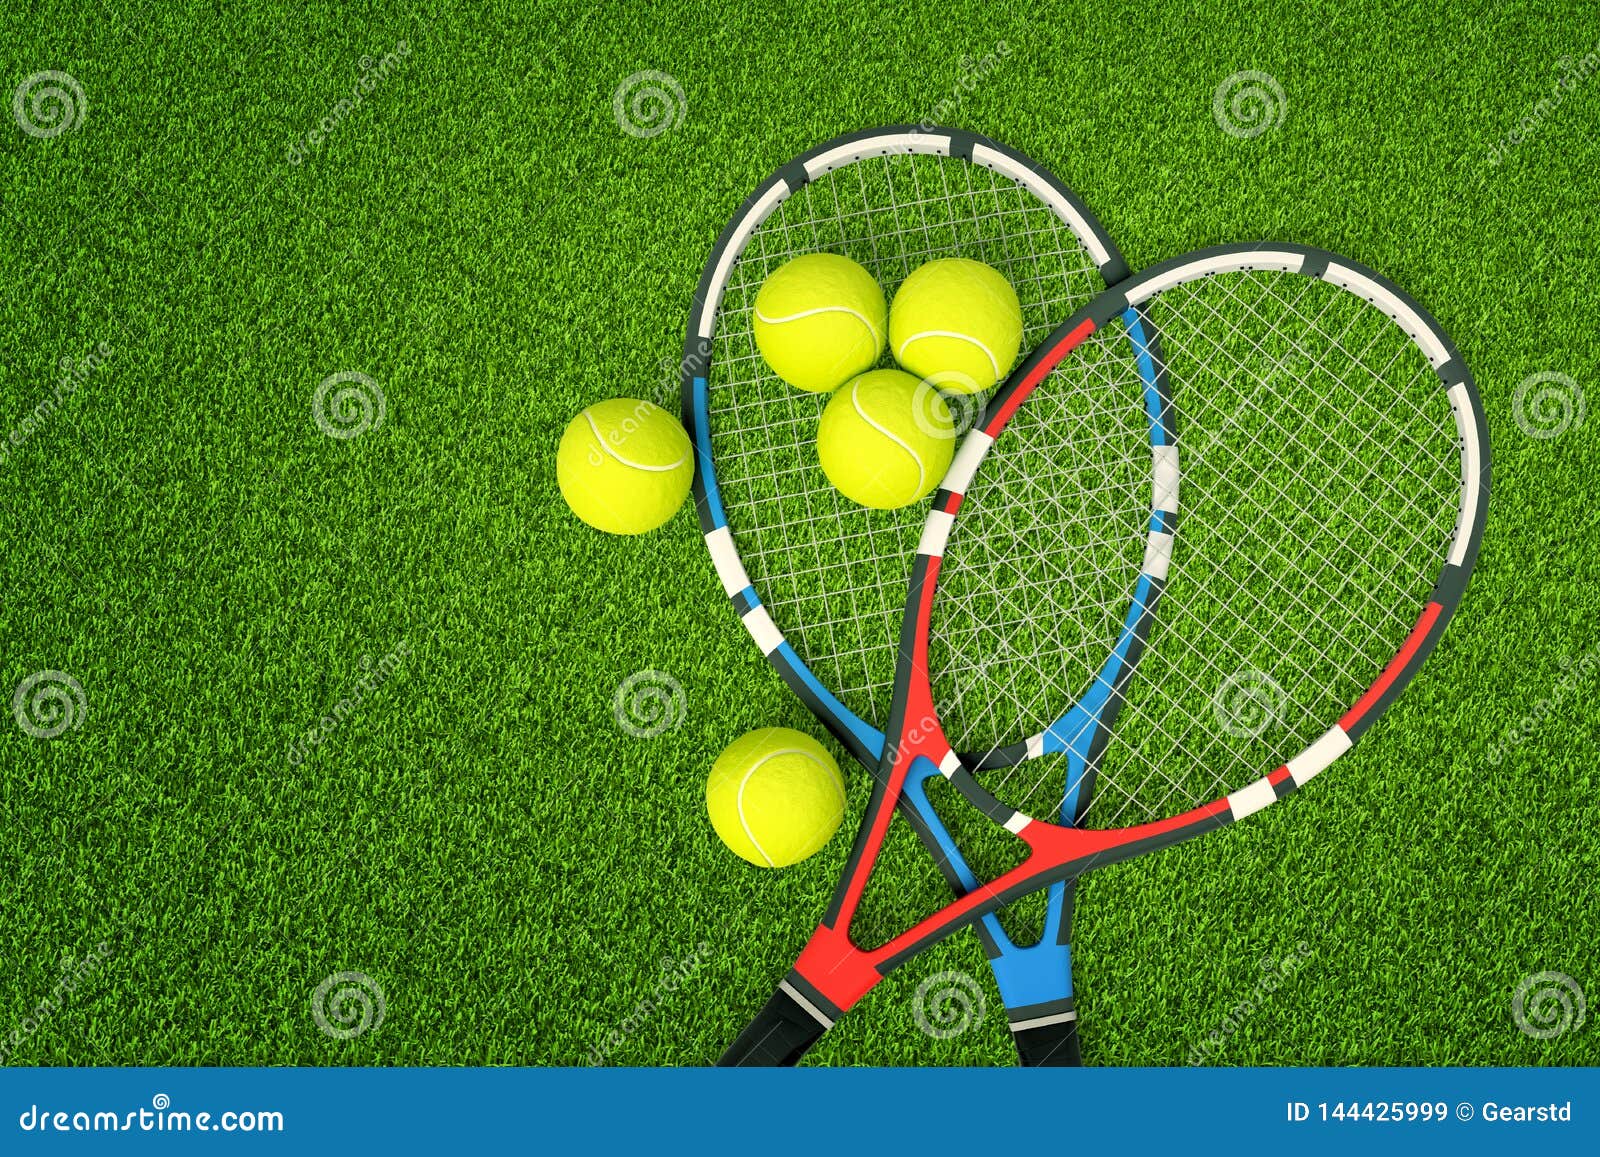 3d Rendering of Two Tennis Rackets and Yellow Tennis Balls on Green Grass  Background Stock Illustration - Illustration of fitness, game: 144425999